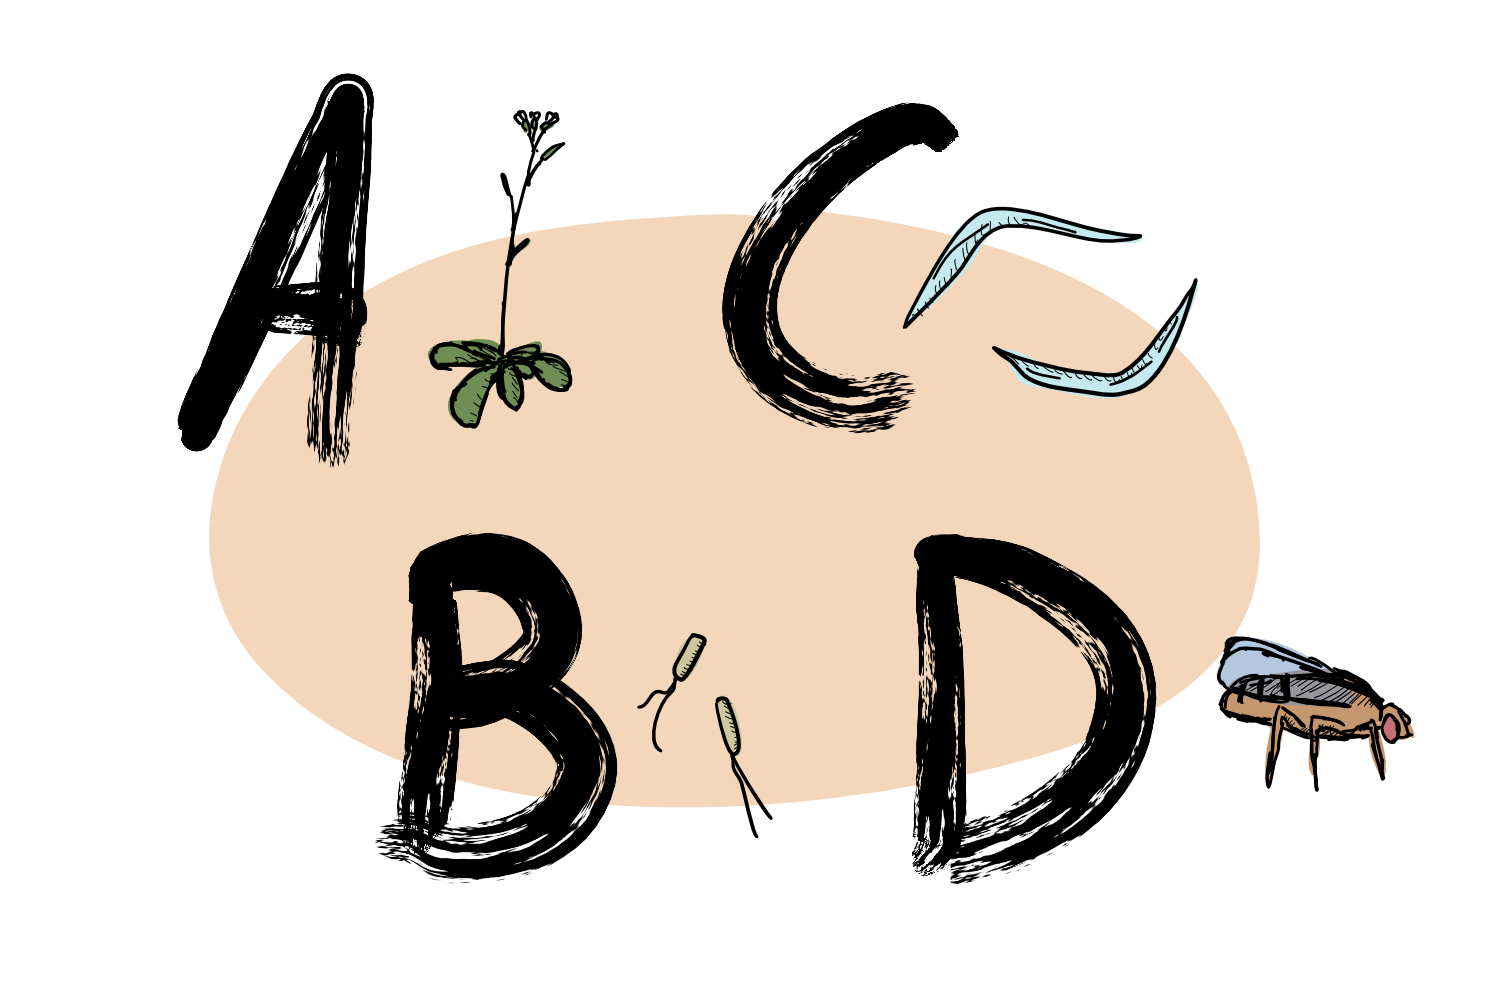 Let’s begin with ABCD